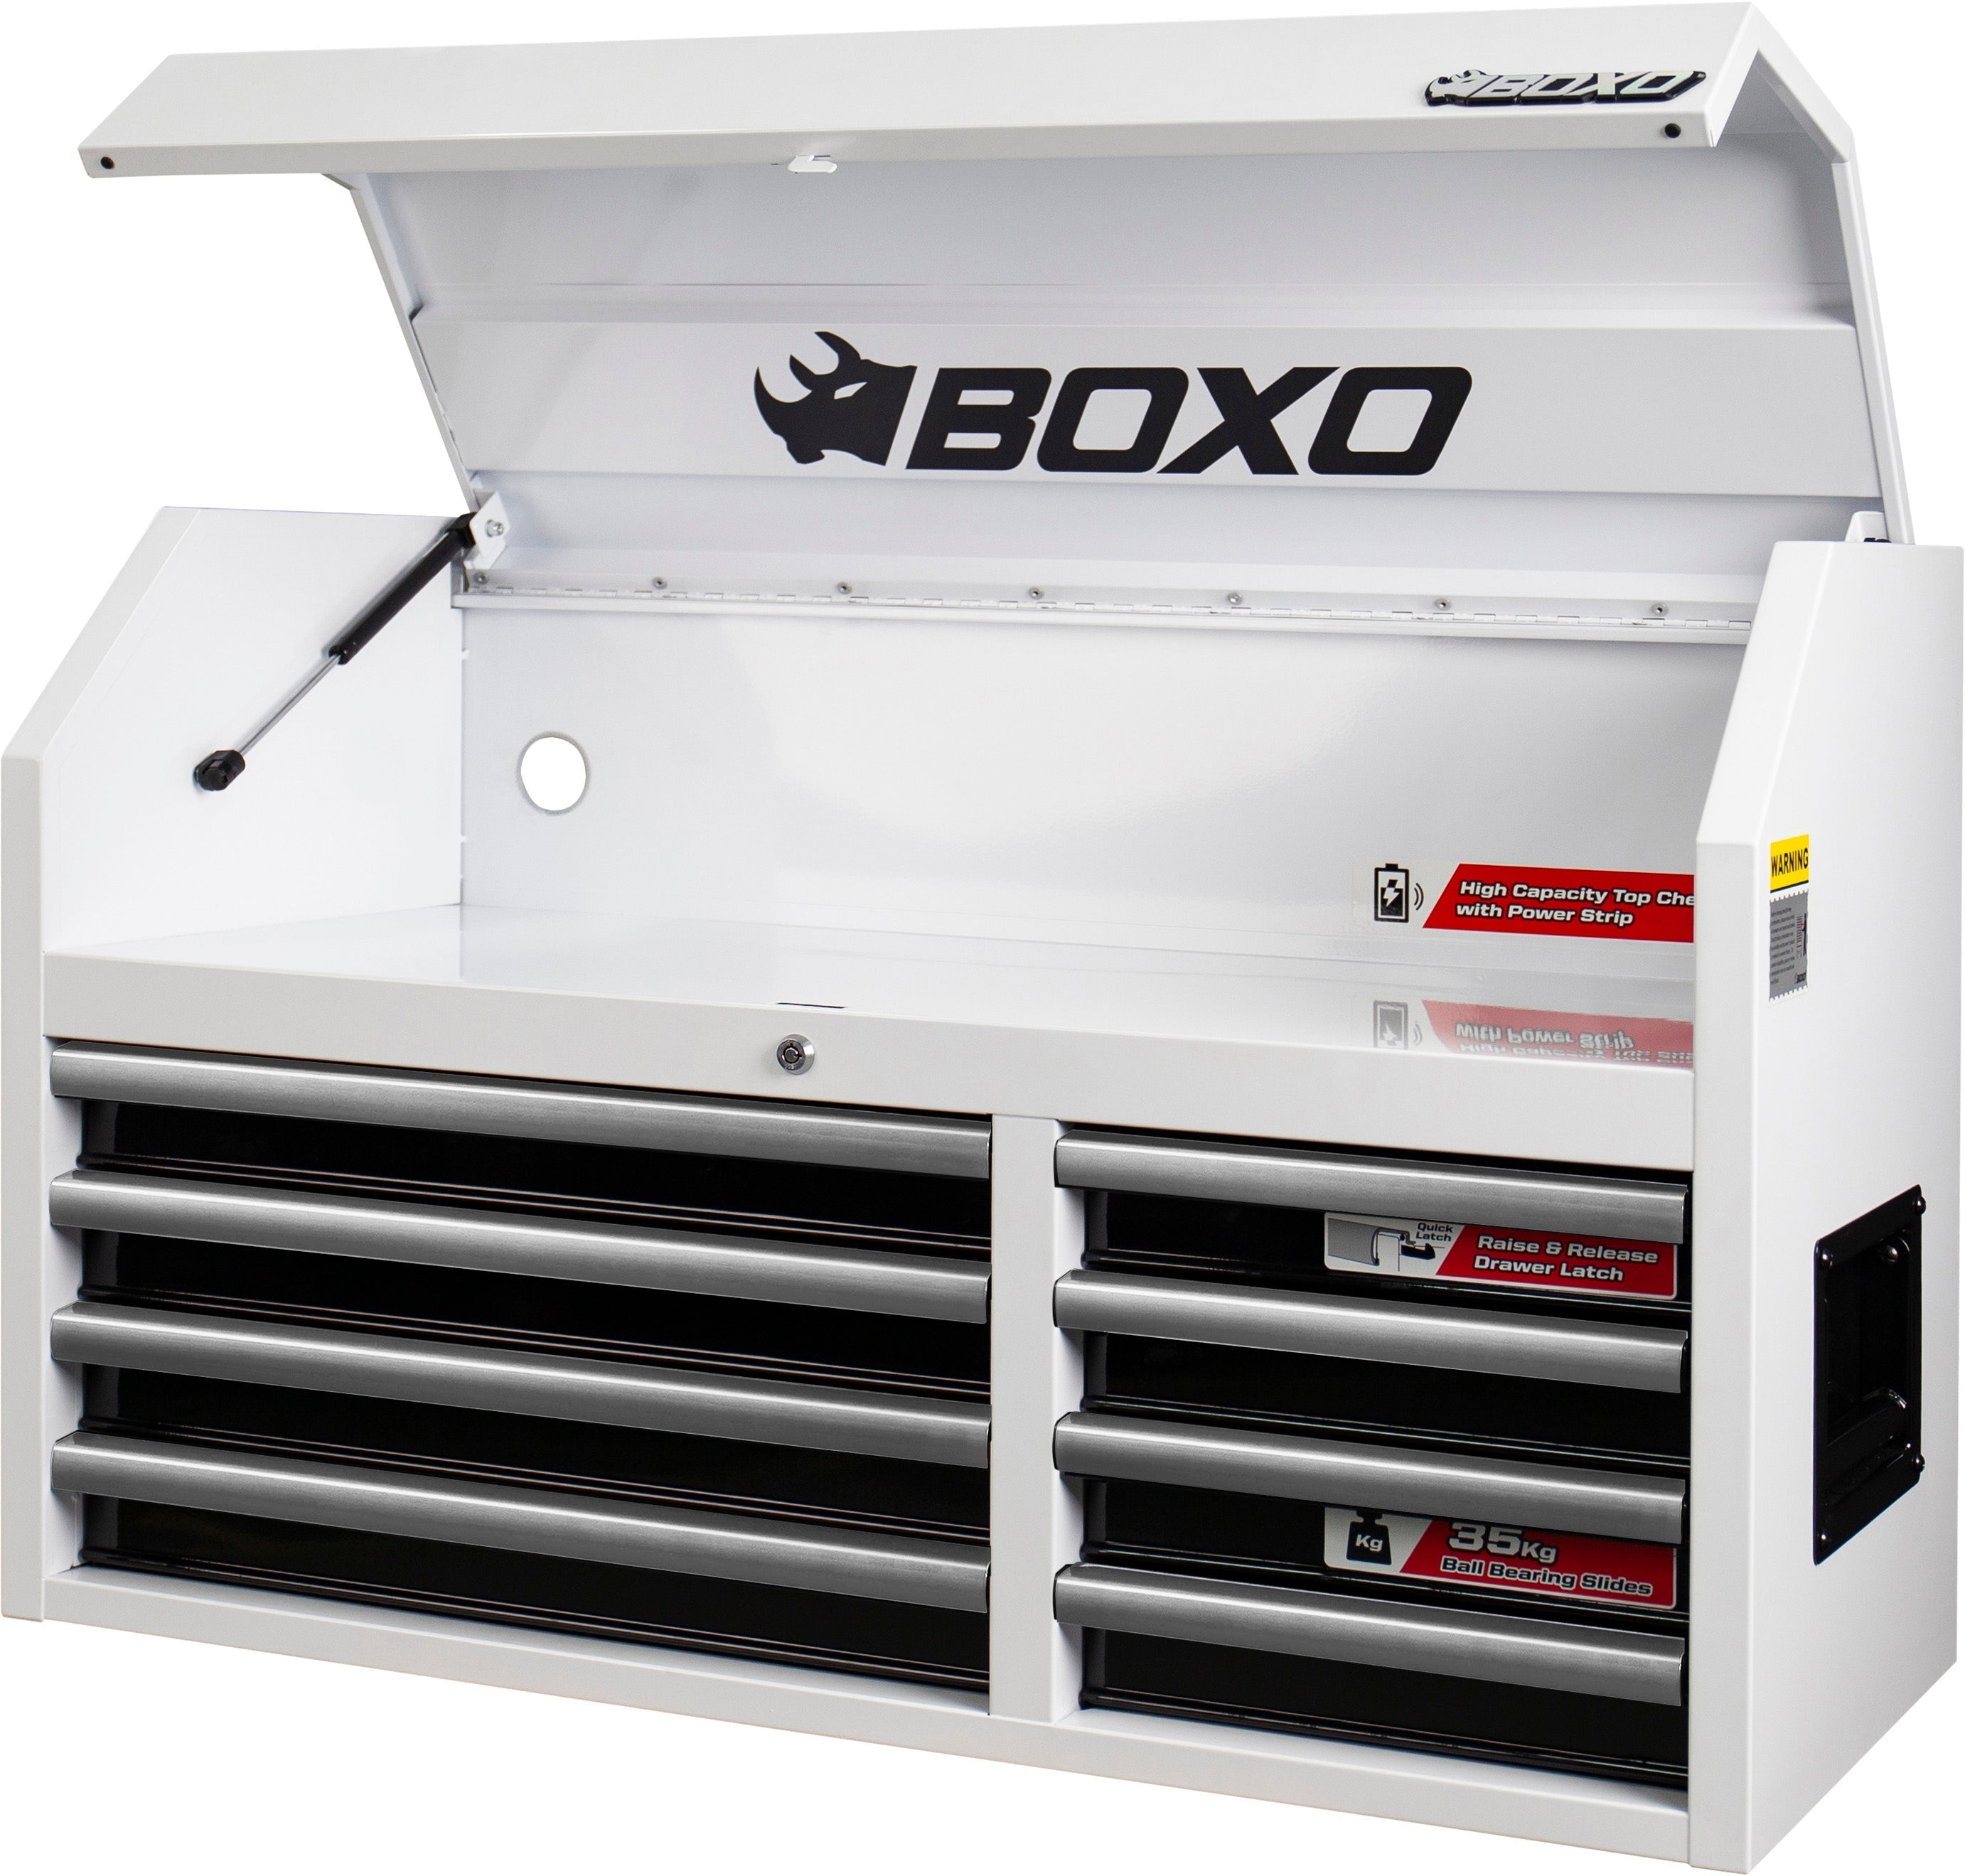 BOXO 41" 8 Drawer Top Box with Drawer Trim Pack - White Body & Trim Colour Options